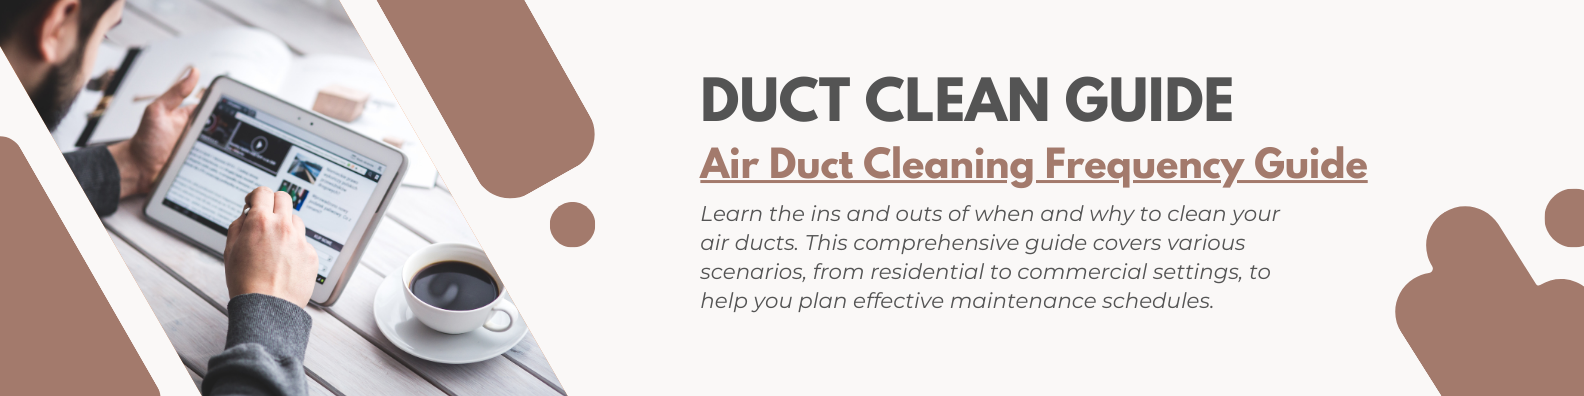 Air Duct Cleaning Guide